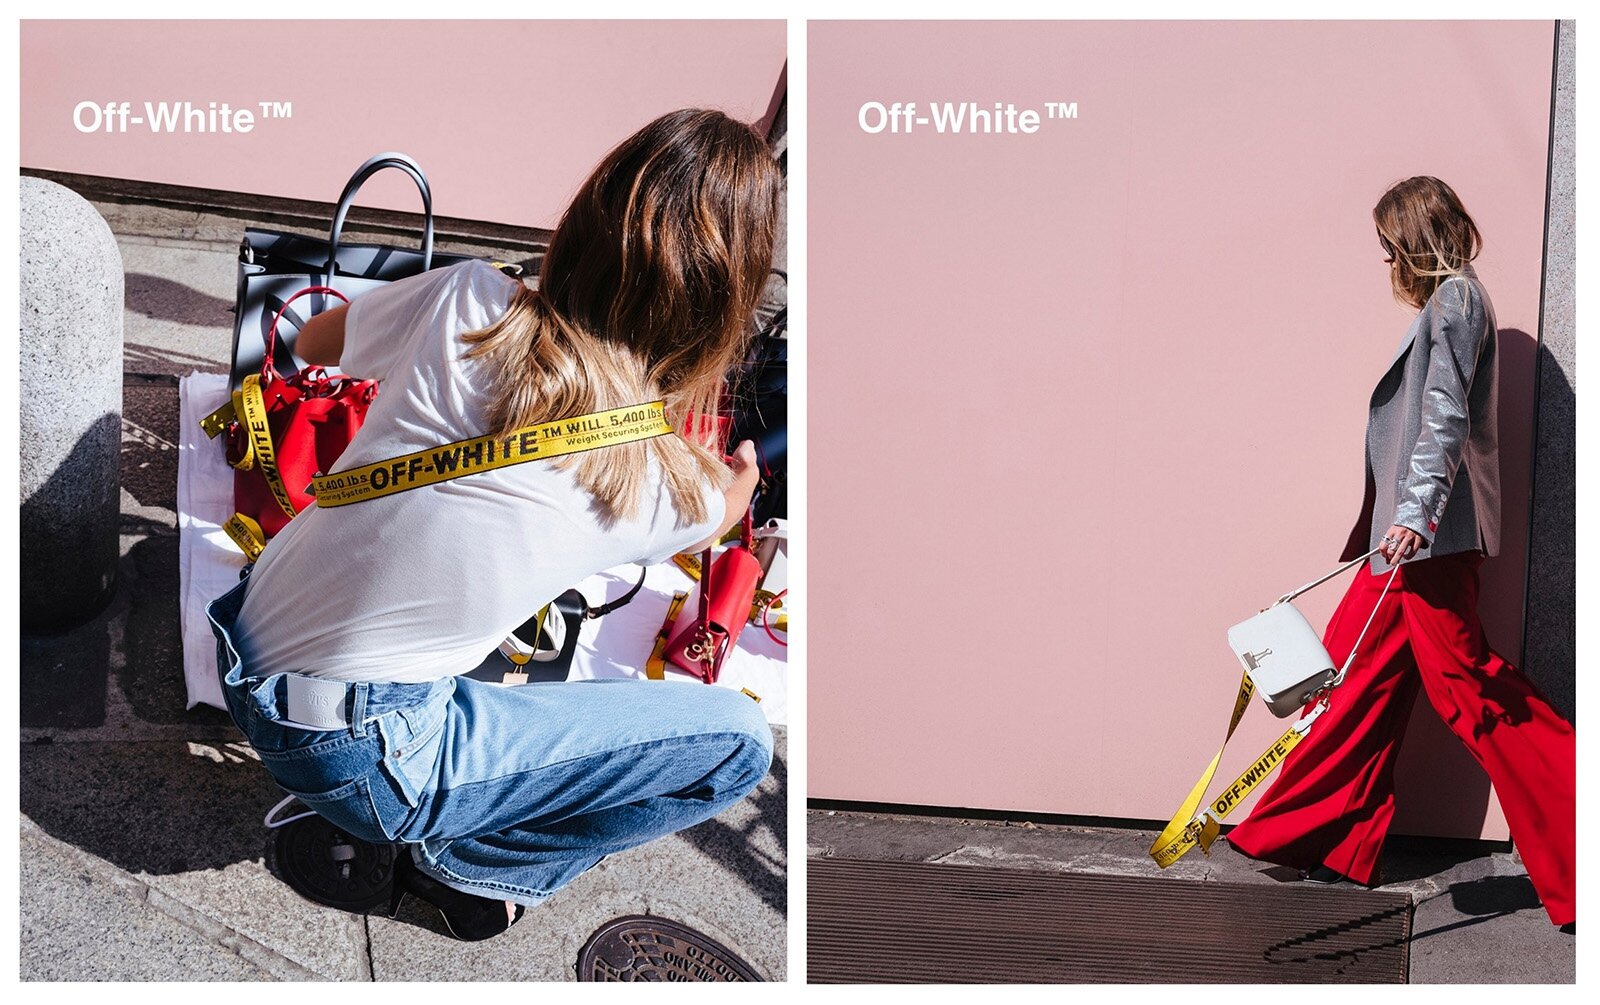 Forget What You've Owner Off-White is ... Off-White - The Fashion Law